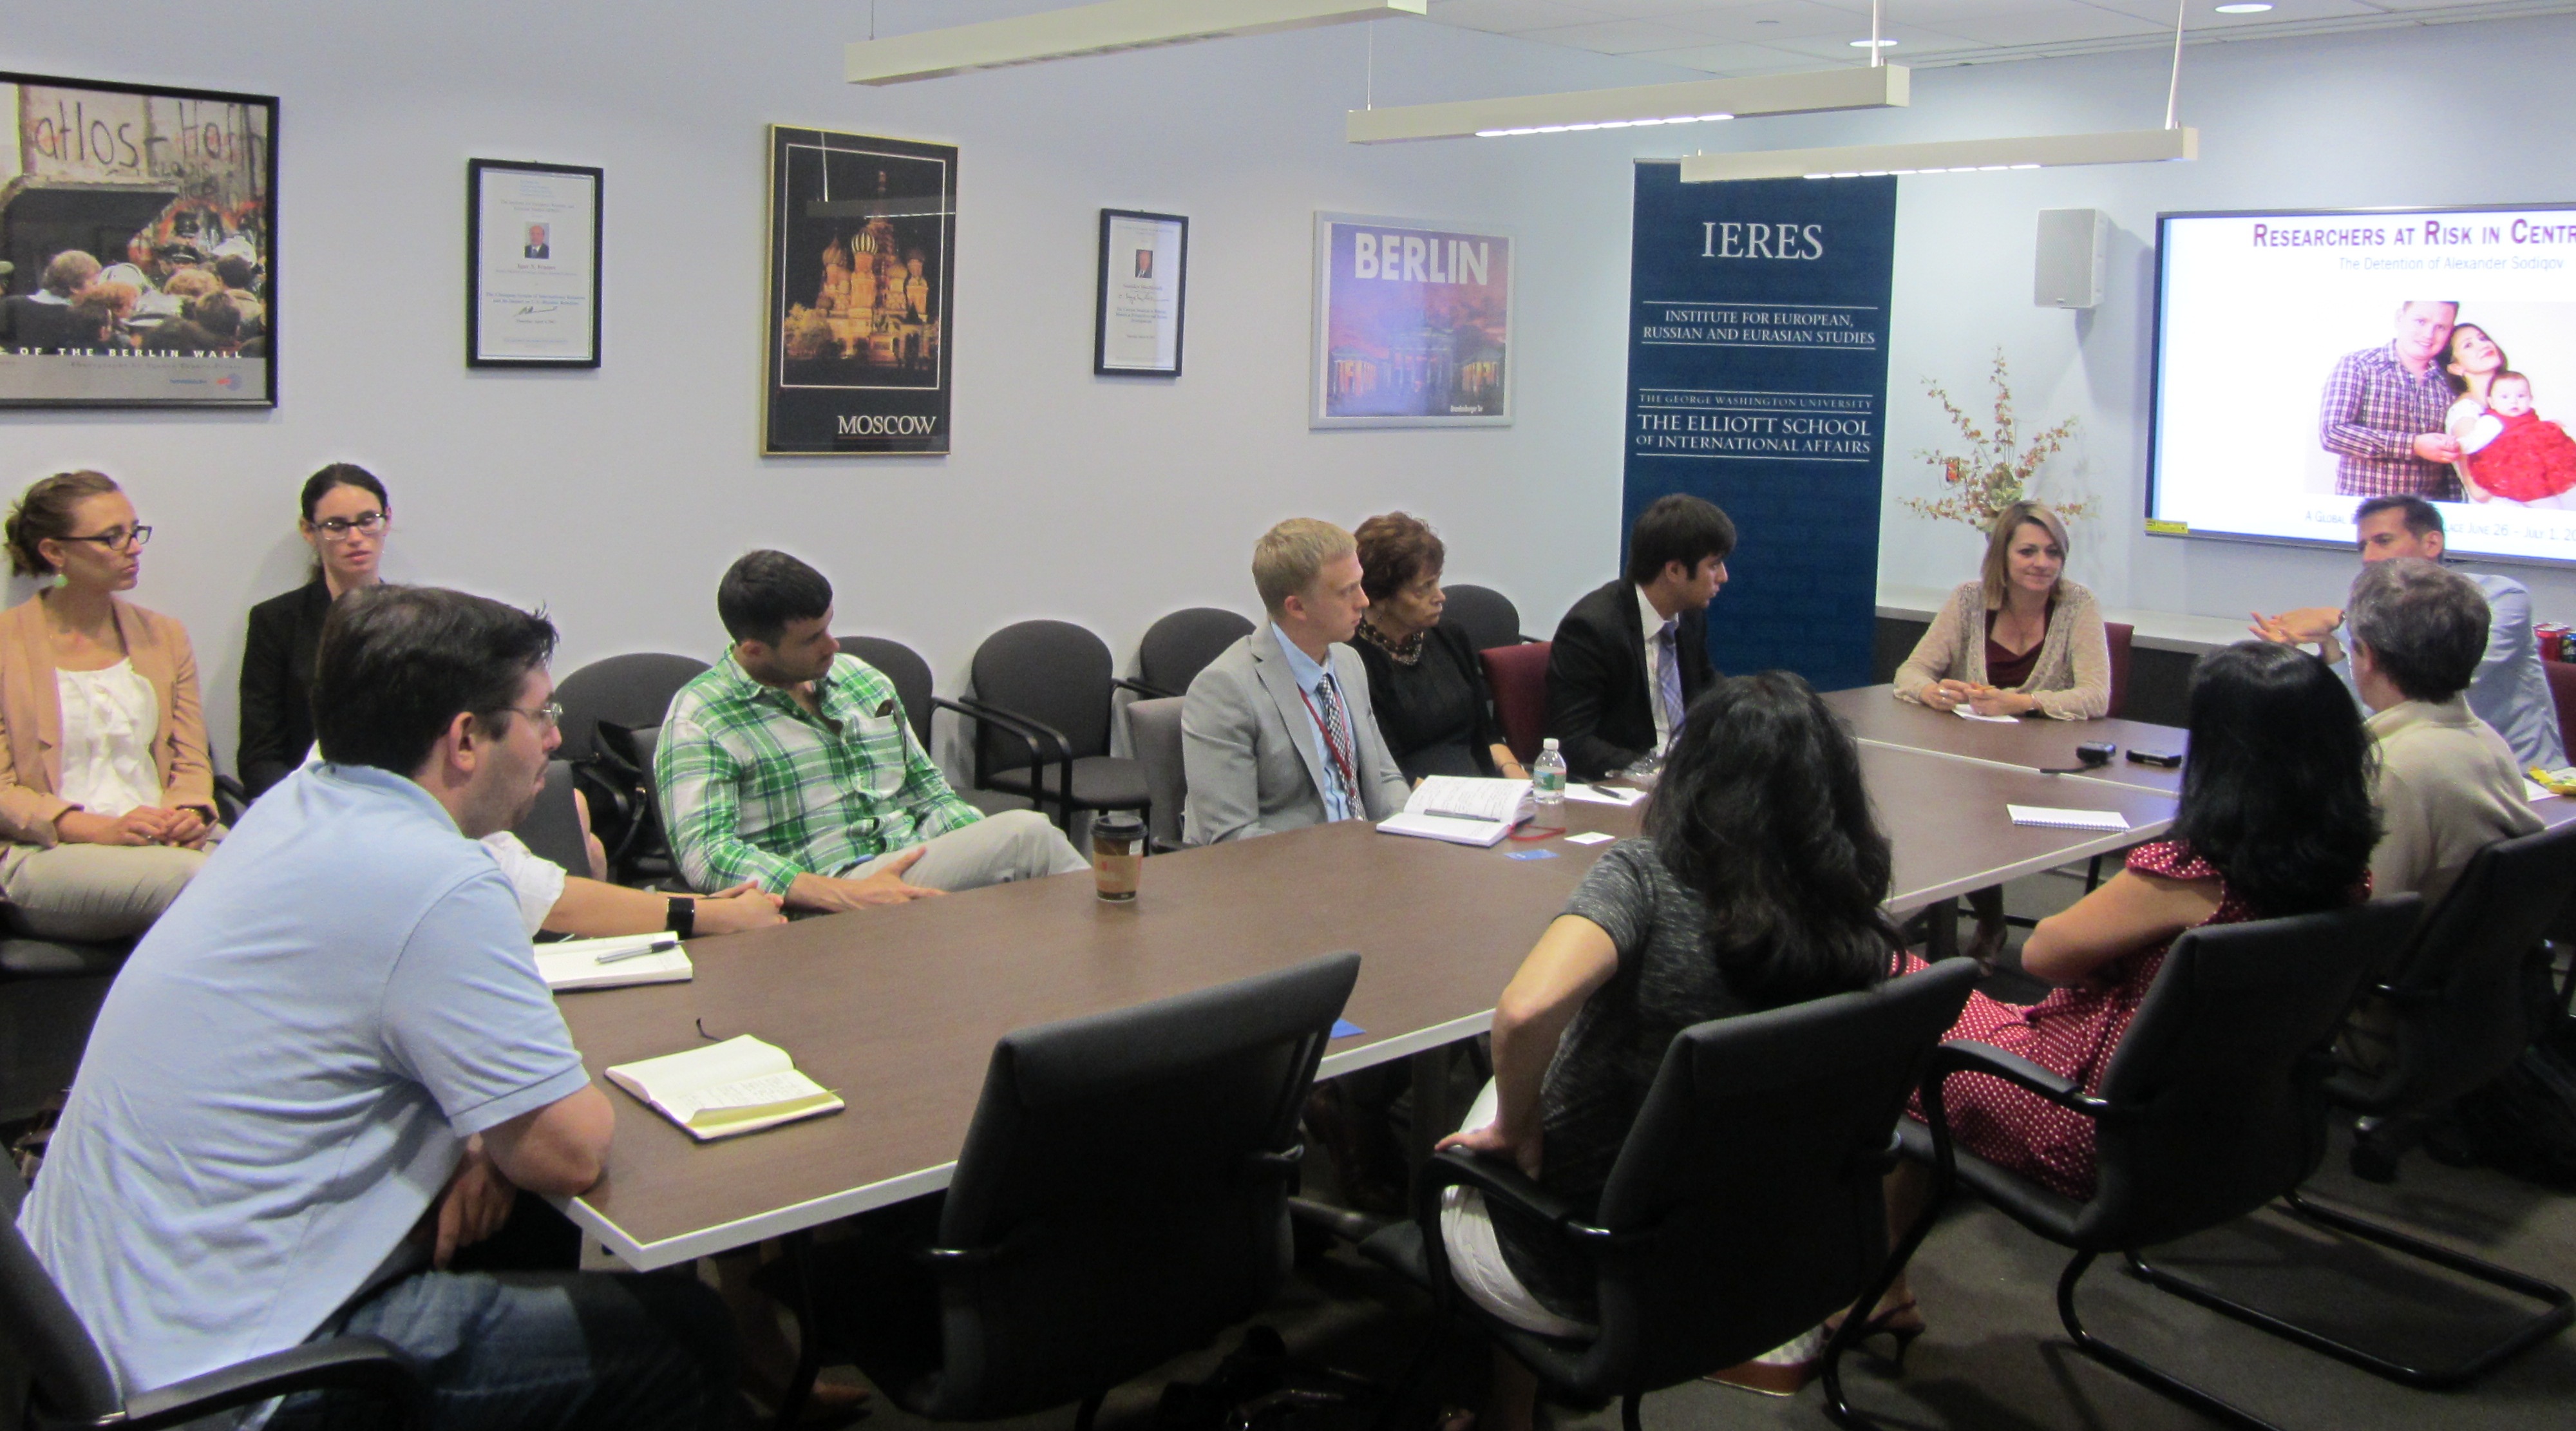 Scholars meet to discuss Alexander Sodiqov's detention at the George Washinton University. The event was hosted by the George Elliot School of  International Affairs (Photo by GWU)